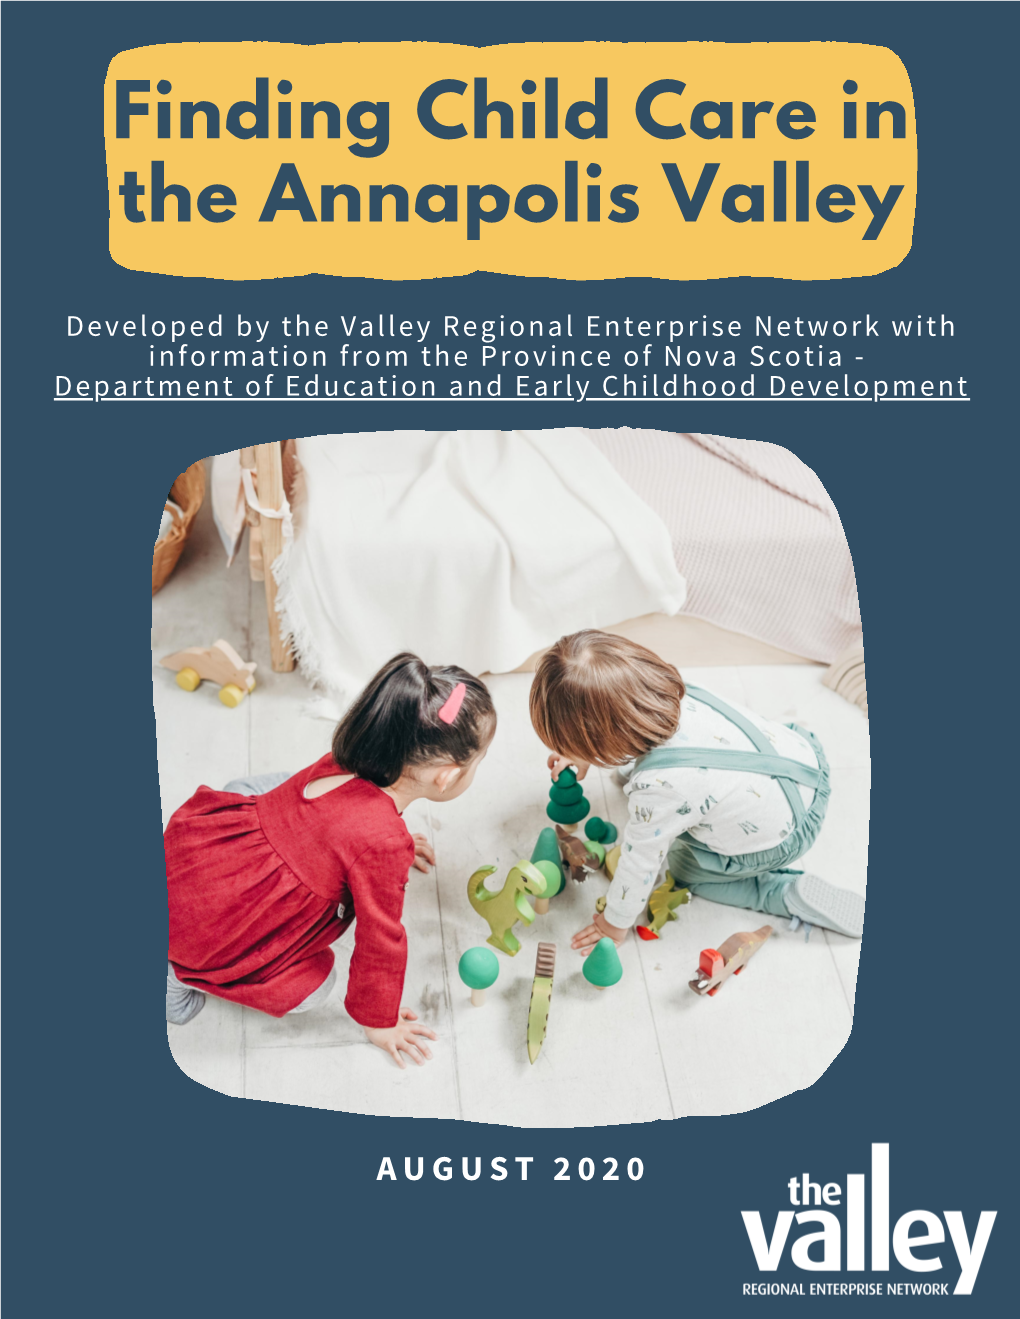 Finding Child Care in the Annapolis Valley